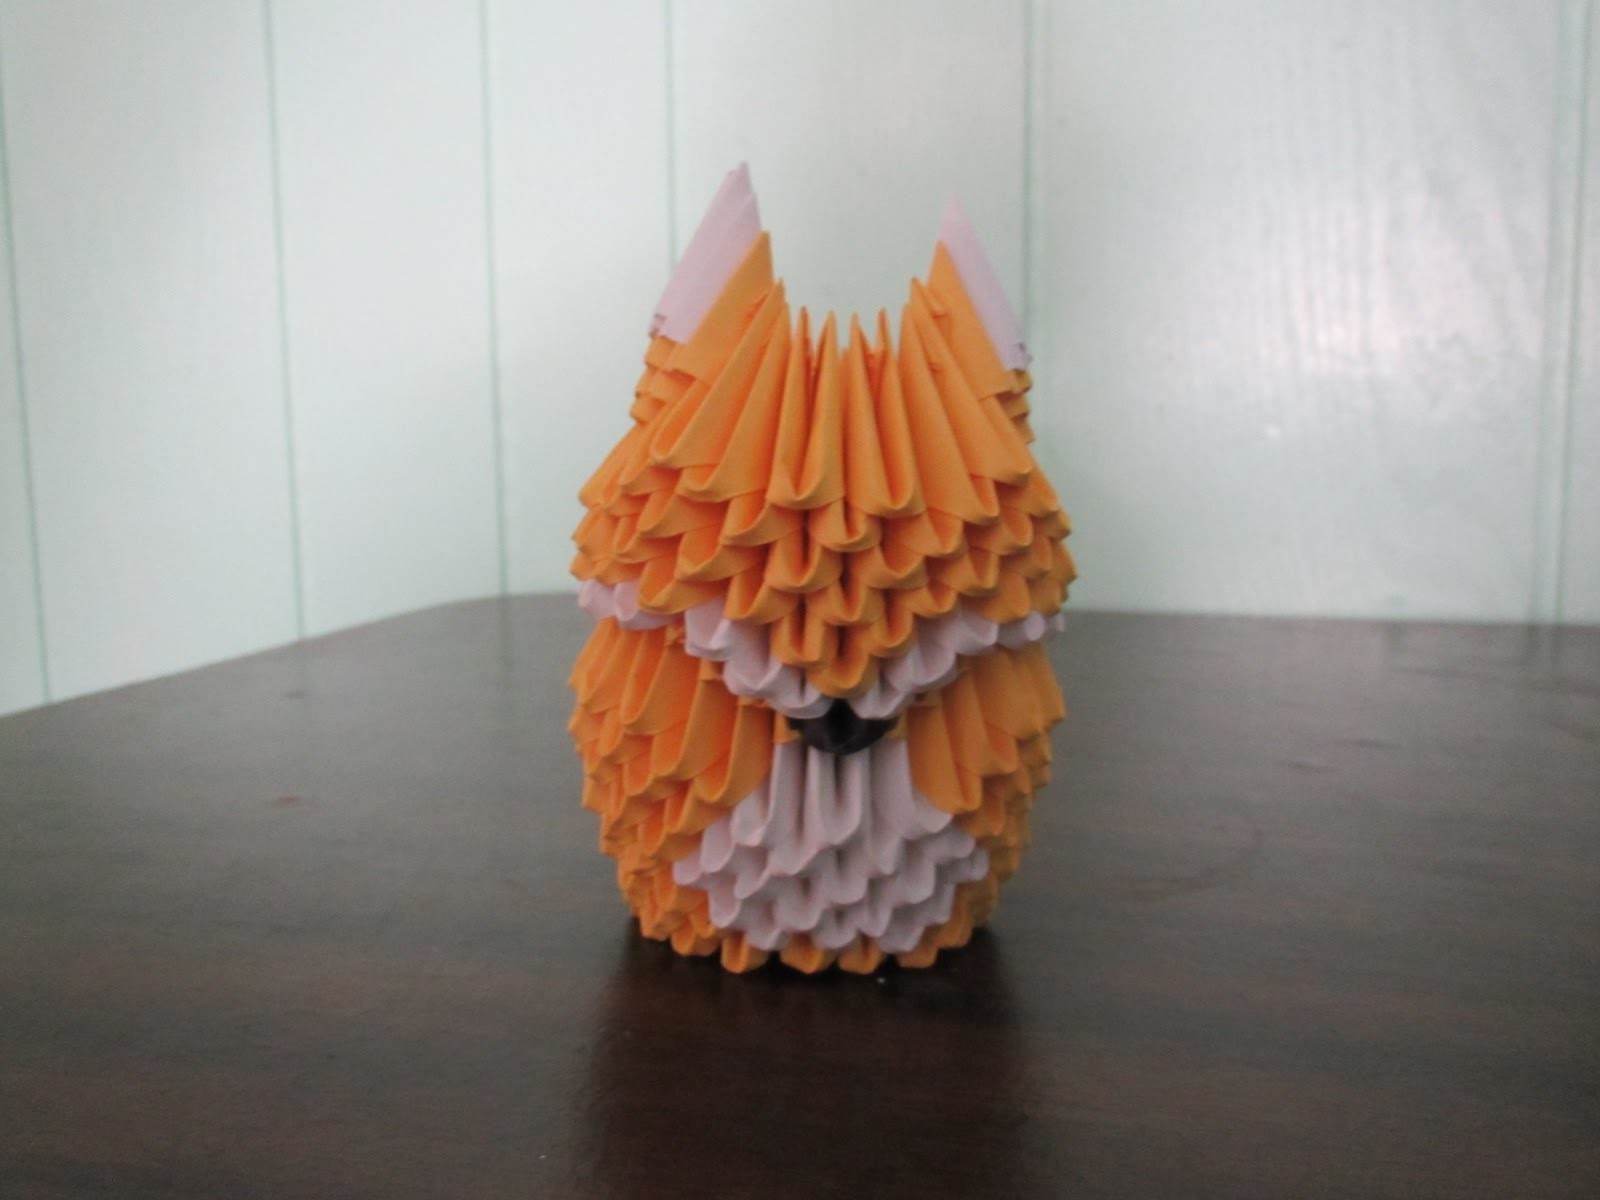 How to make a 3D Origami Fox Part 2